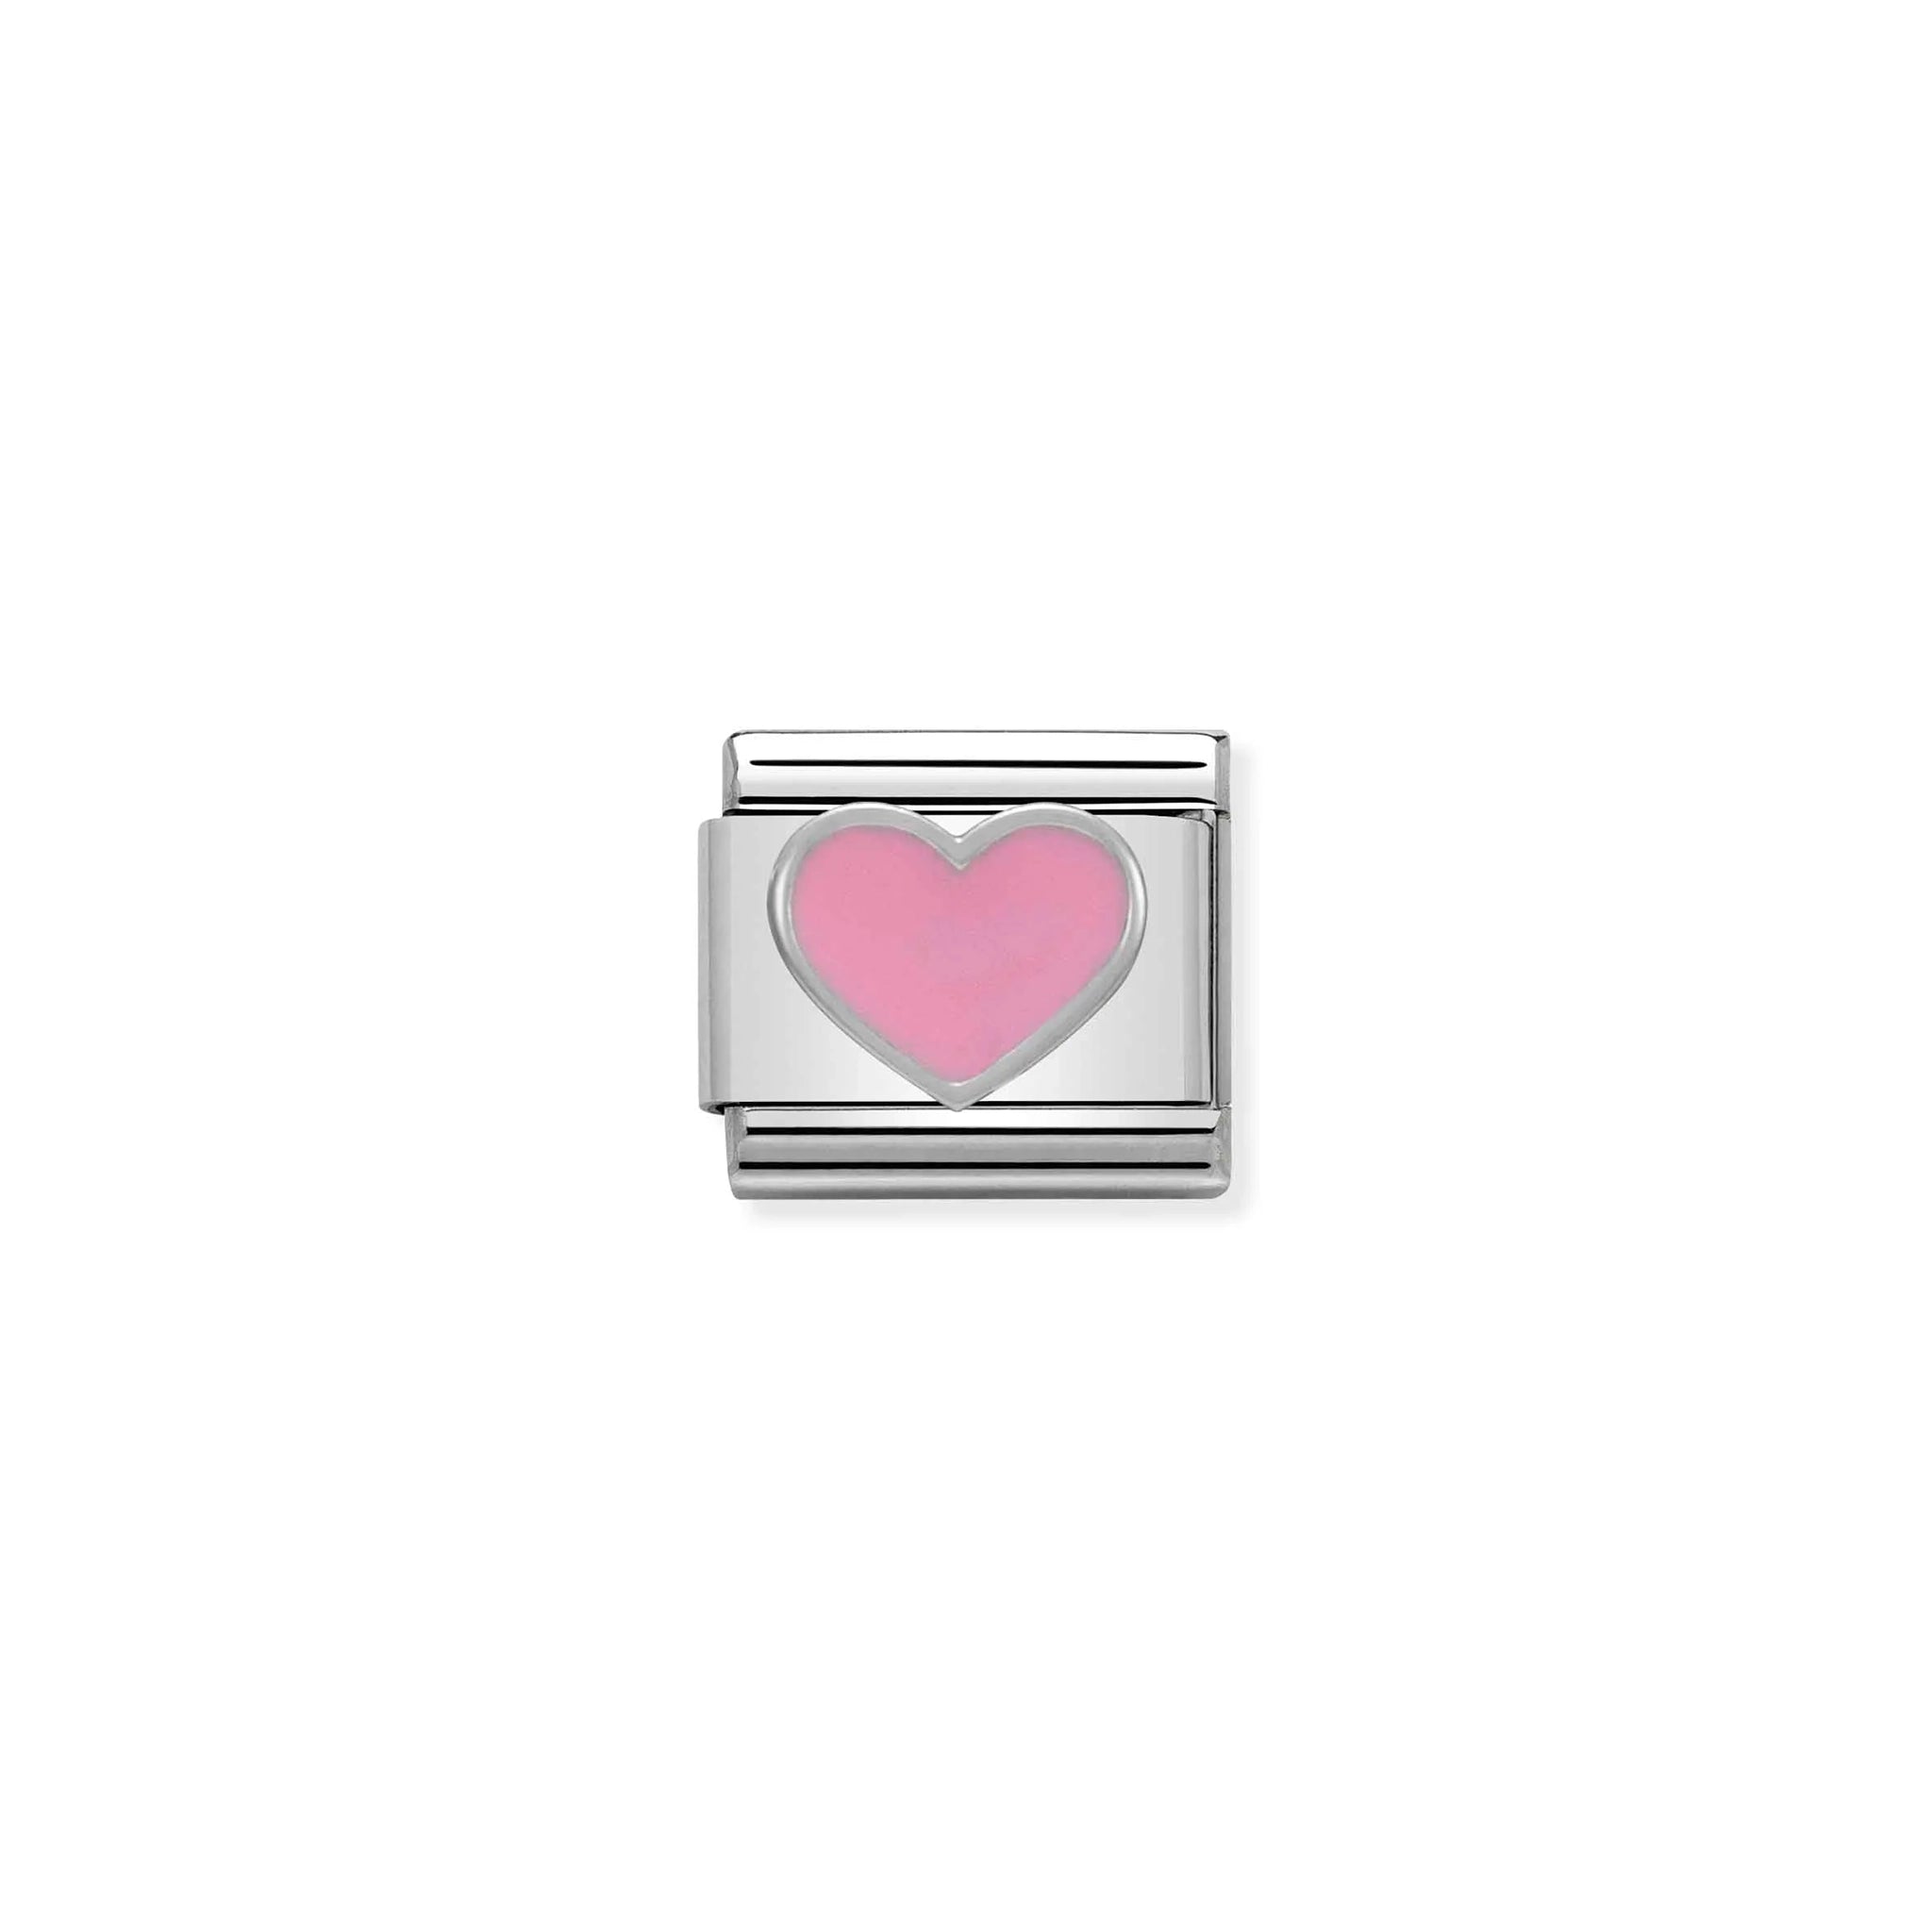 Nomination charm link featuring a pink enamel heart outlined in silver